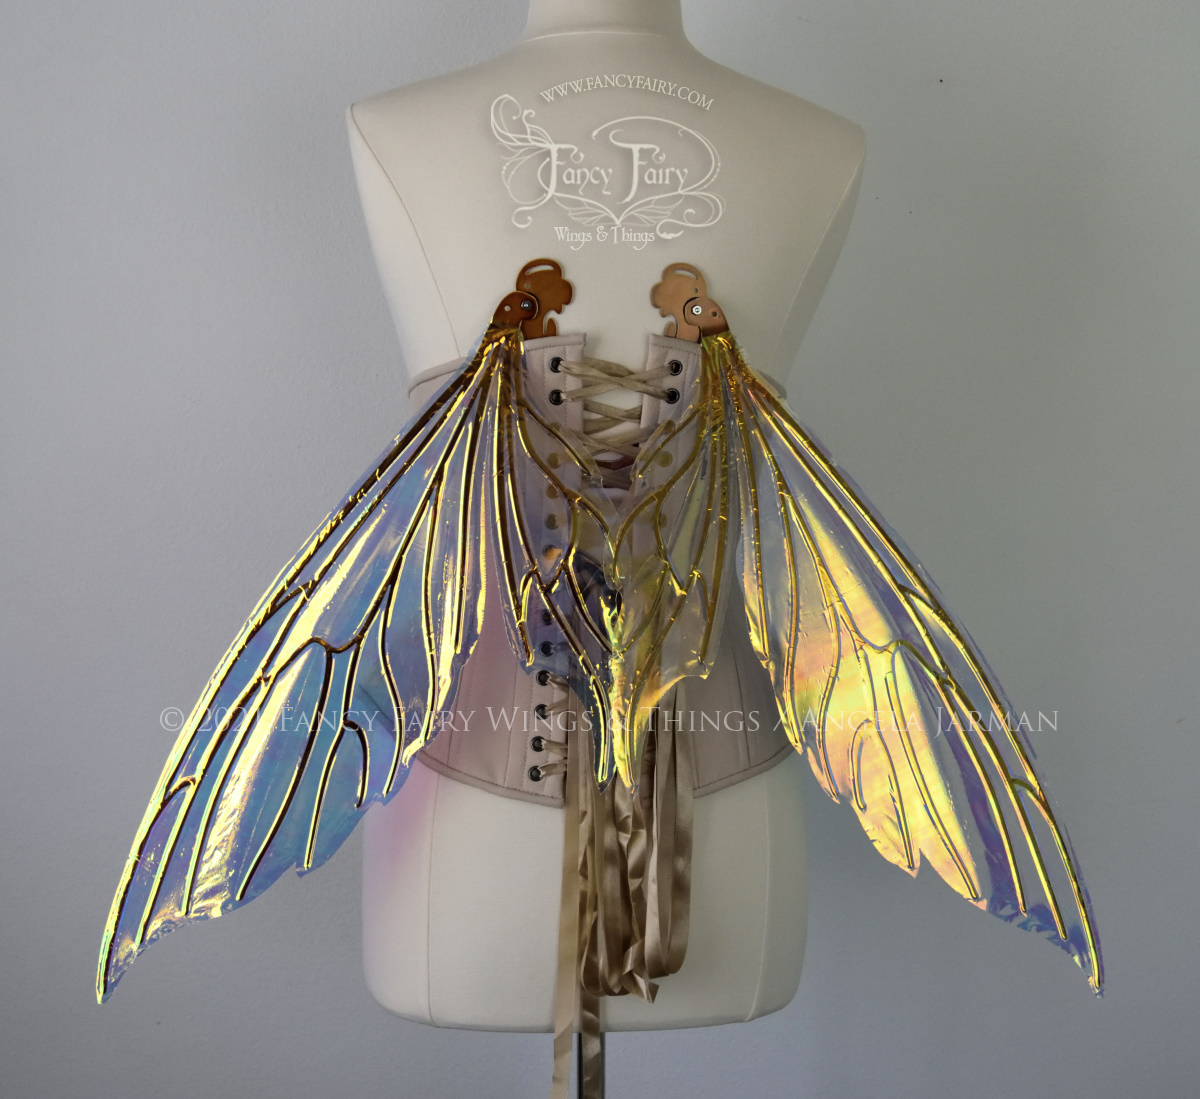 Econo Aynia Iridescent Convertible Fairy Wings in Clear Diamond Fire with Copper veins